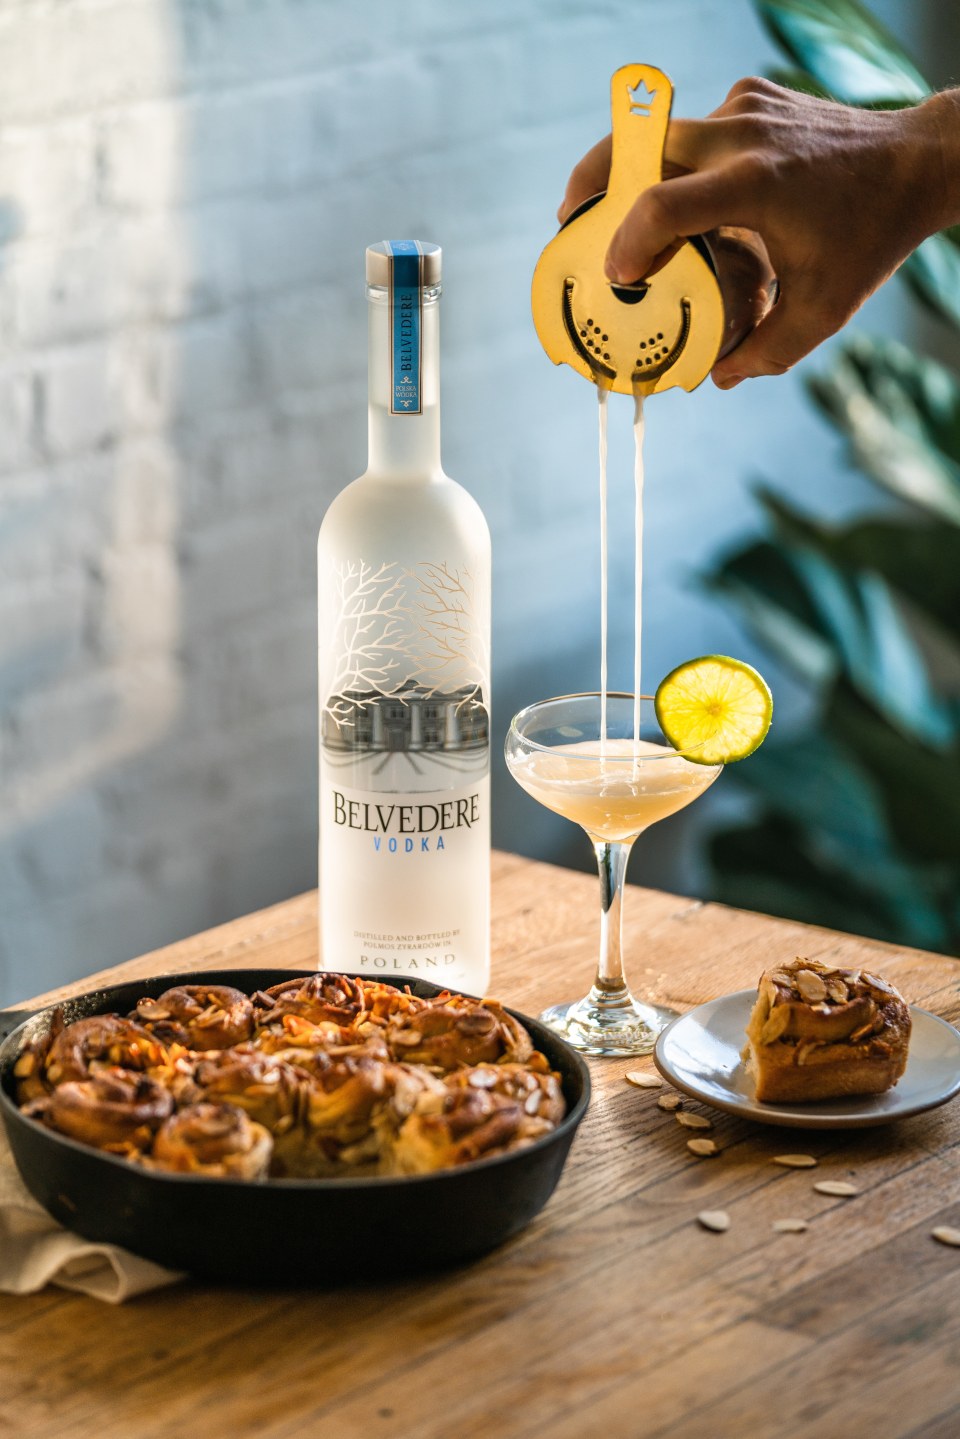 Belvedere creates vodka from one harvest - The Spirits Business